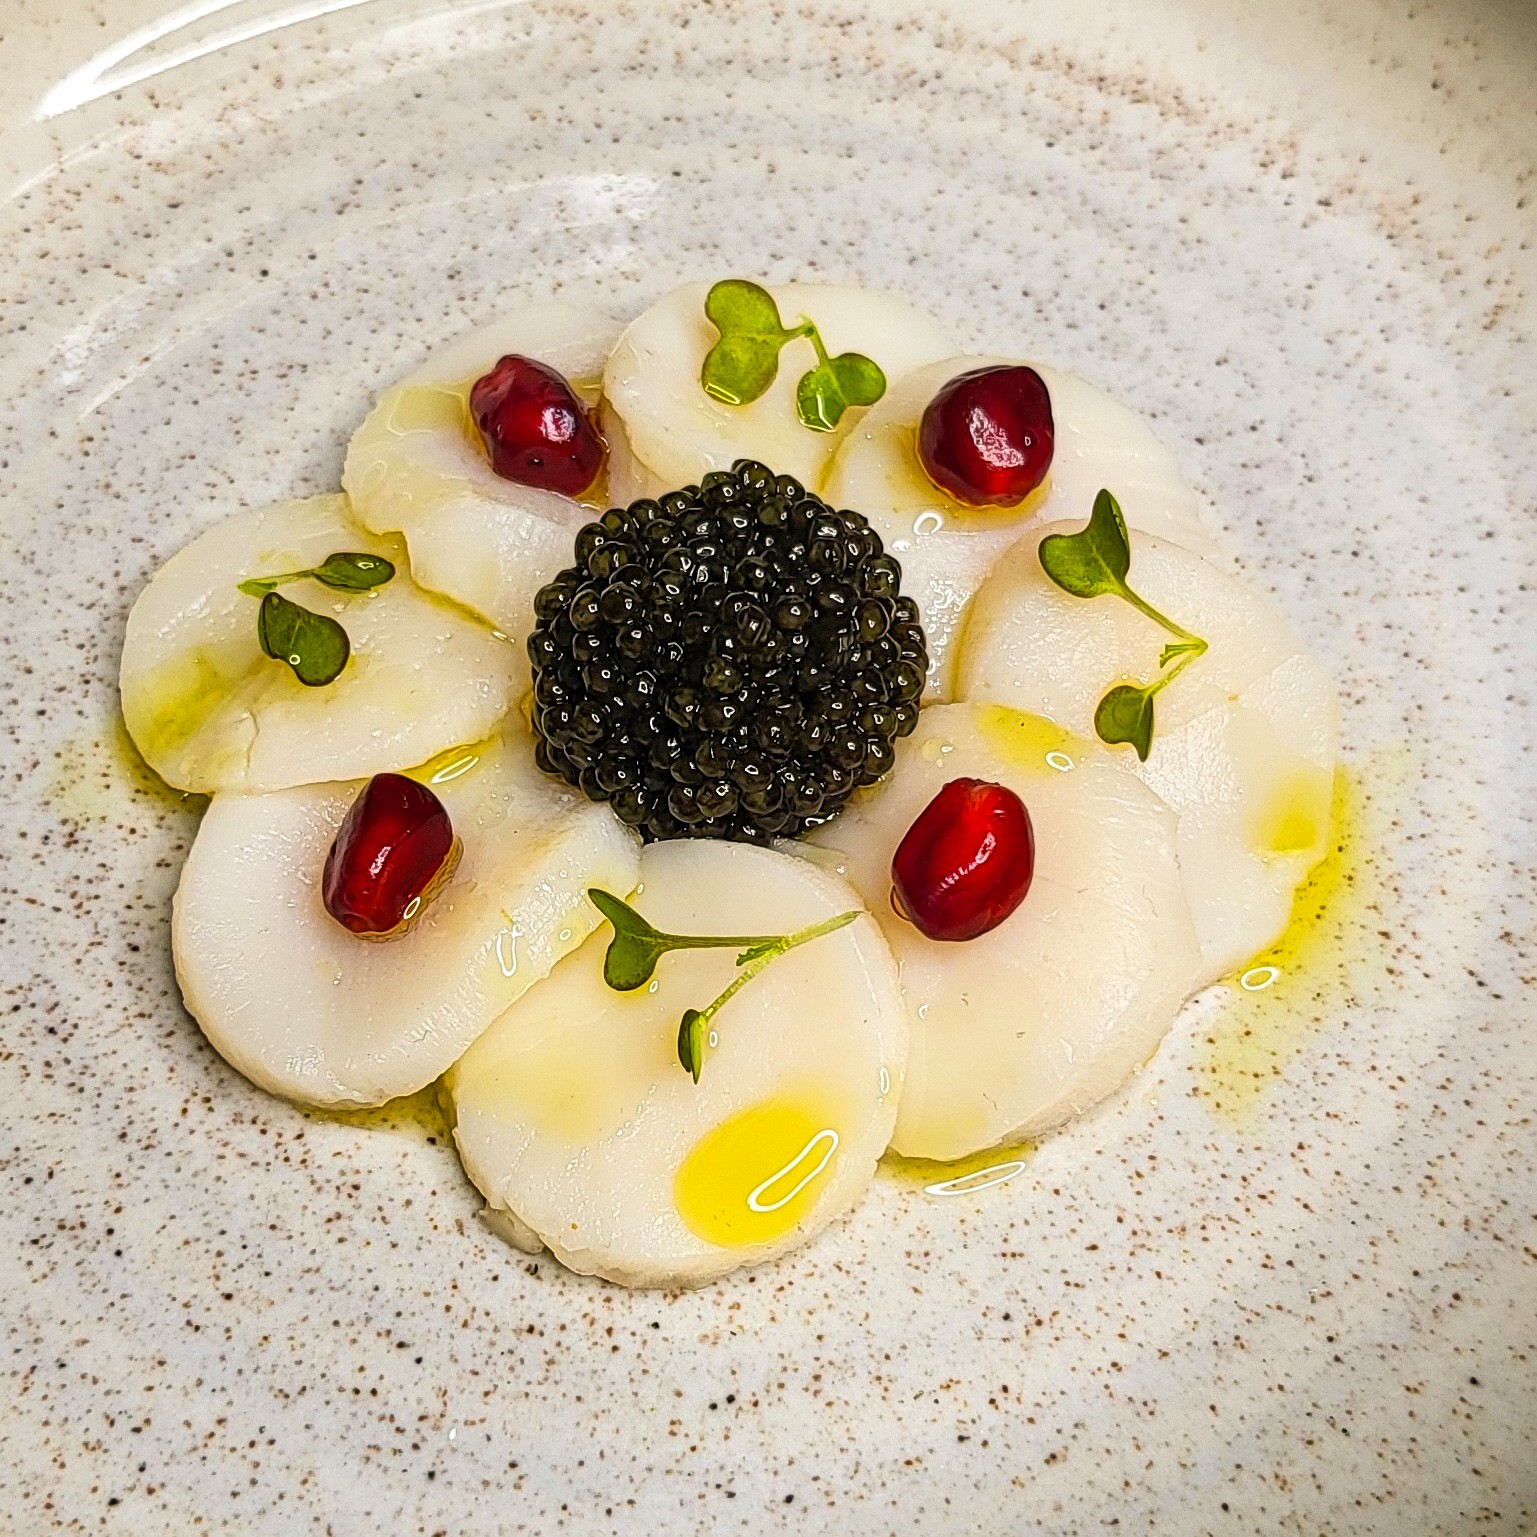 A scallop dish topped with Sterling Caviar